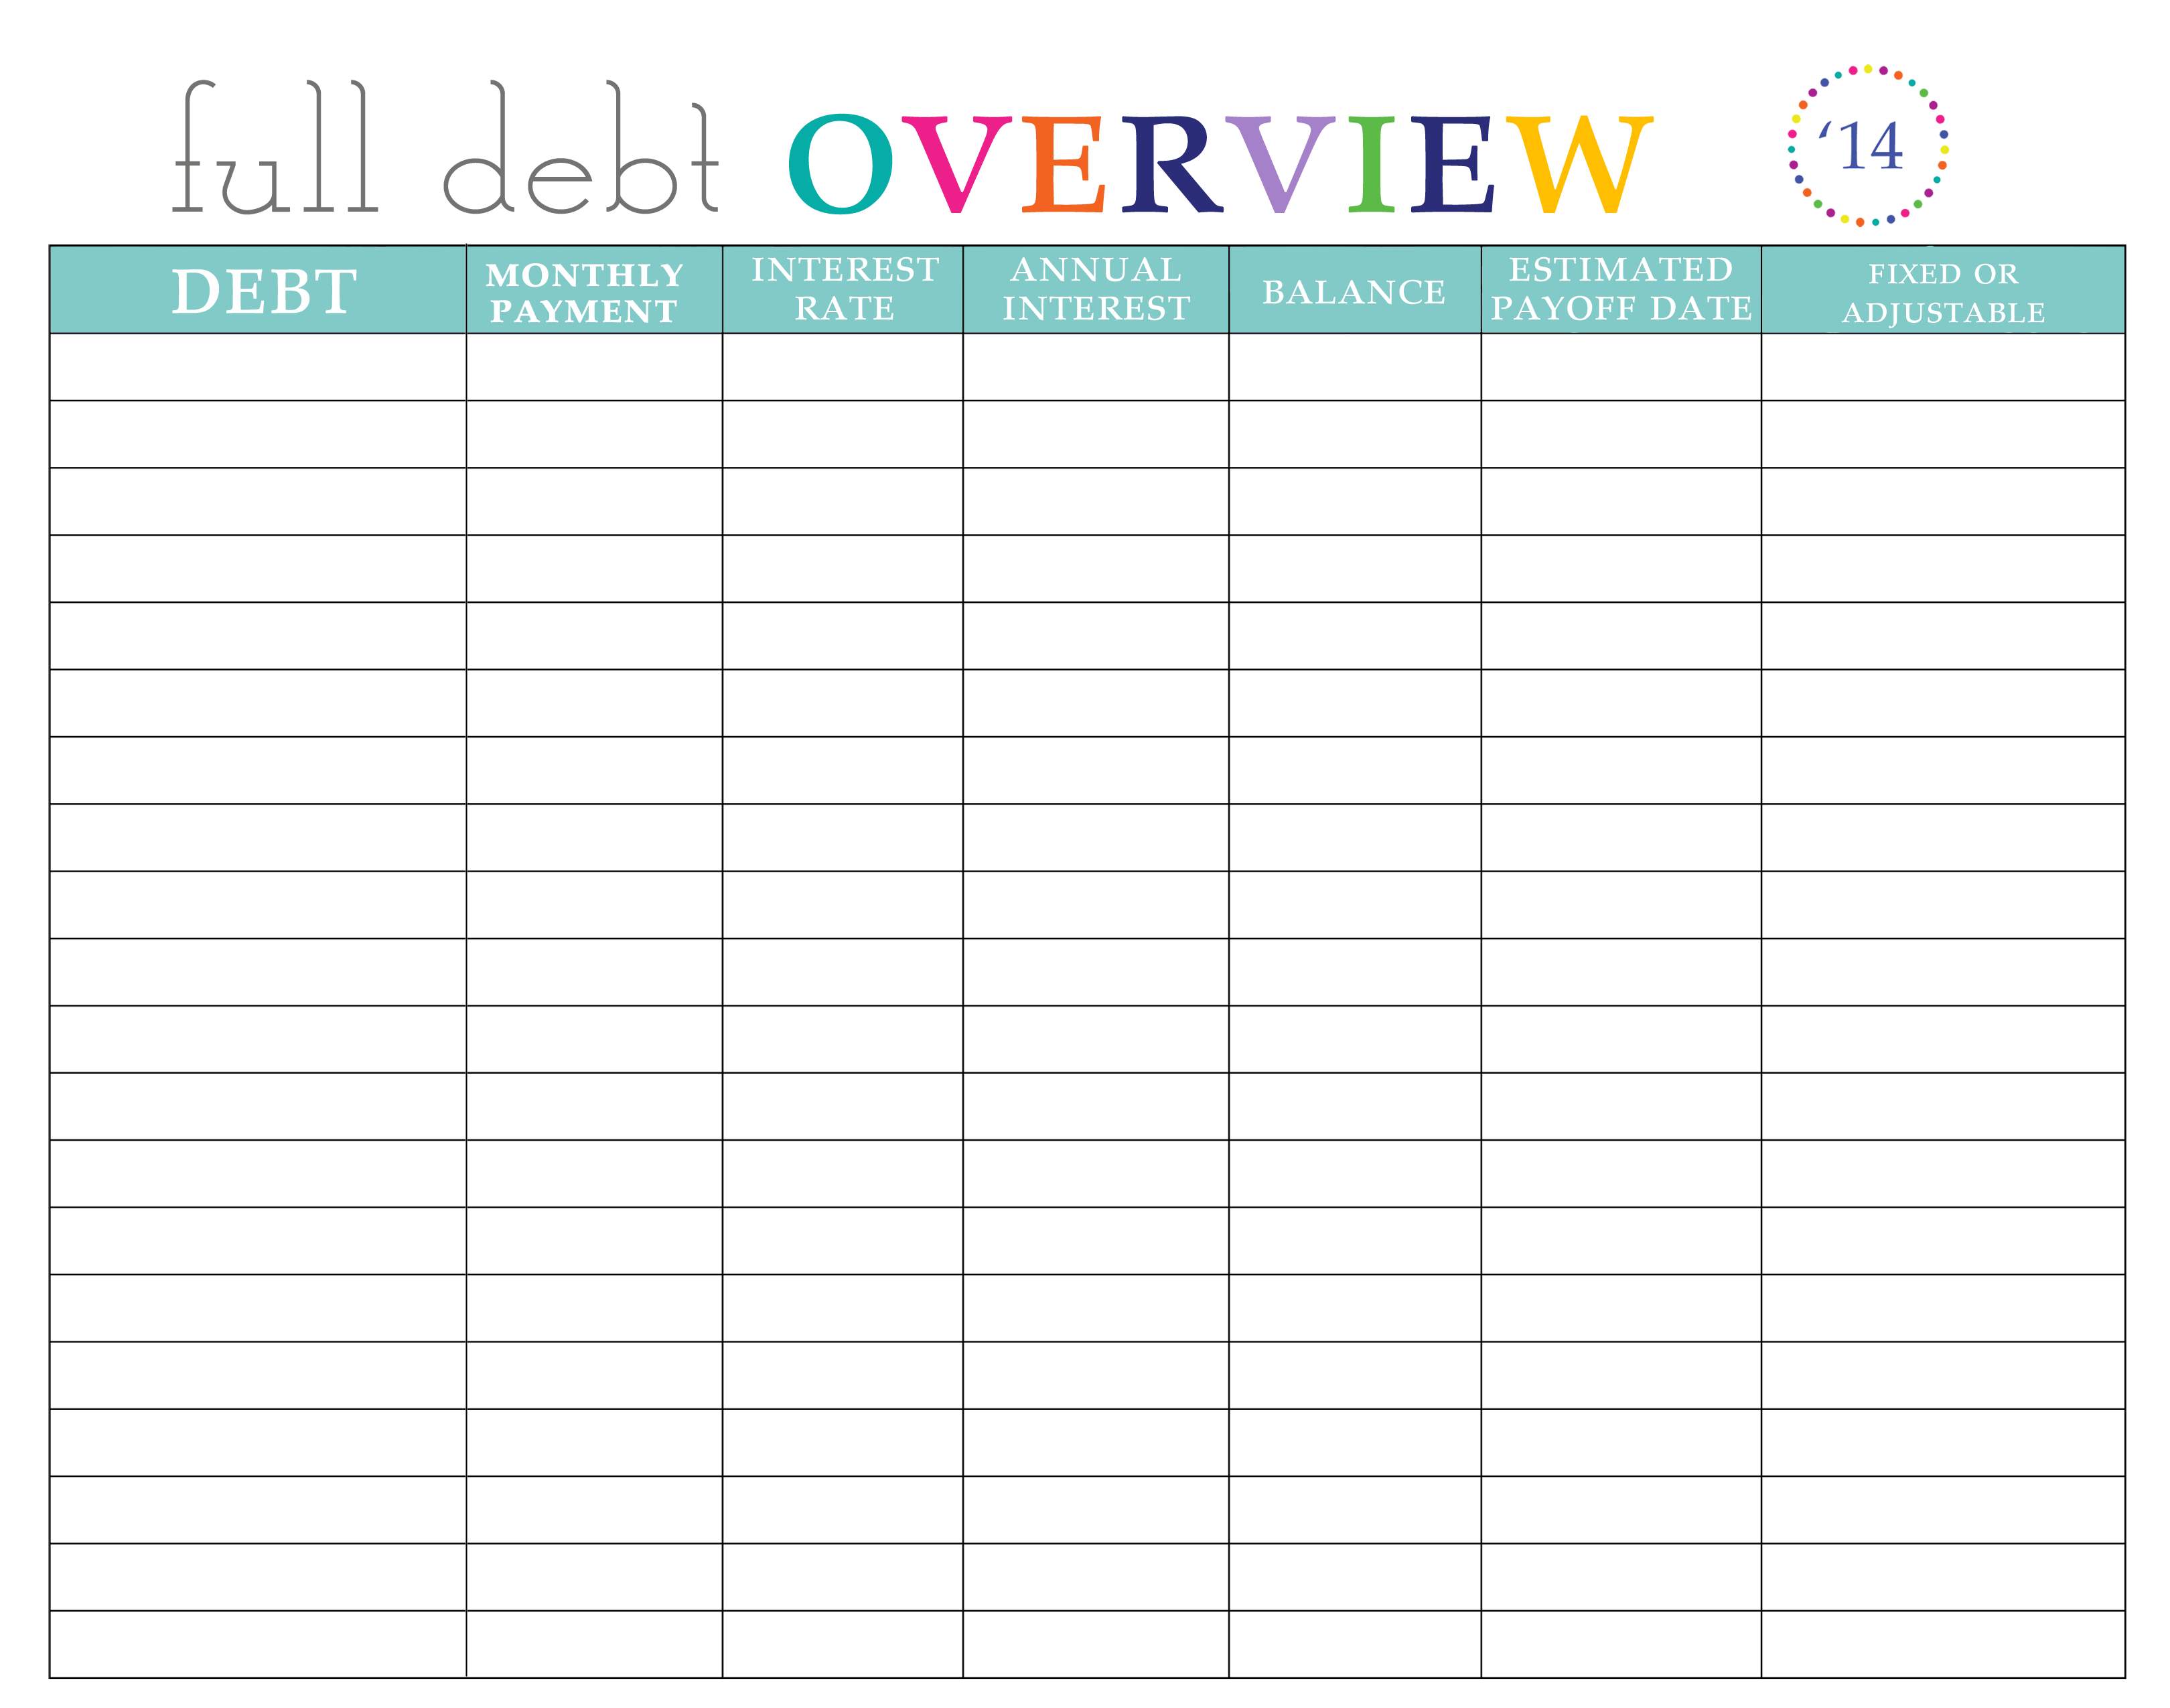 Accounting Spreadsheet Template For Small Business